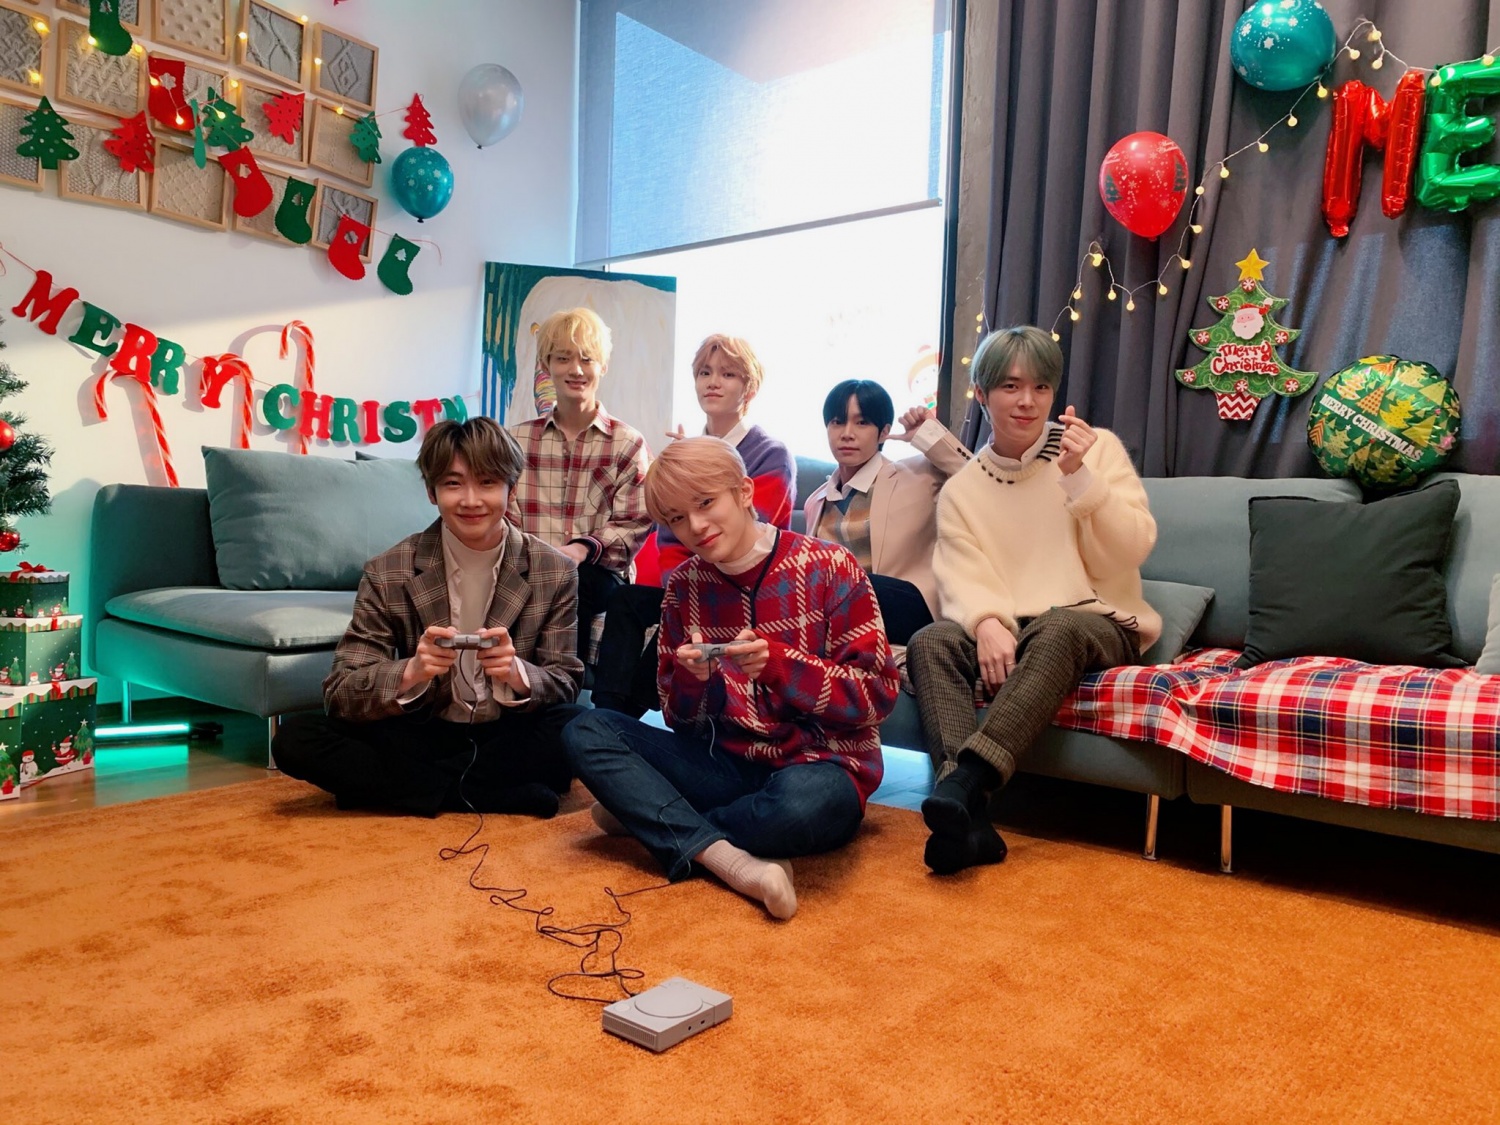 Verivery, surprise release of new song 'Love at first sight' for Christmas